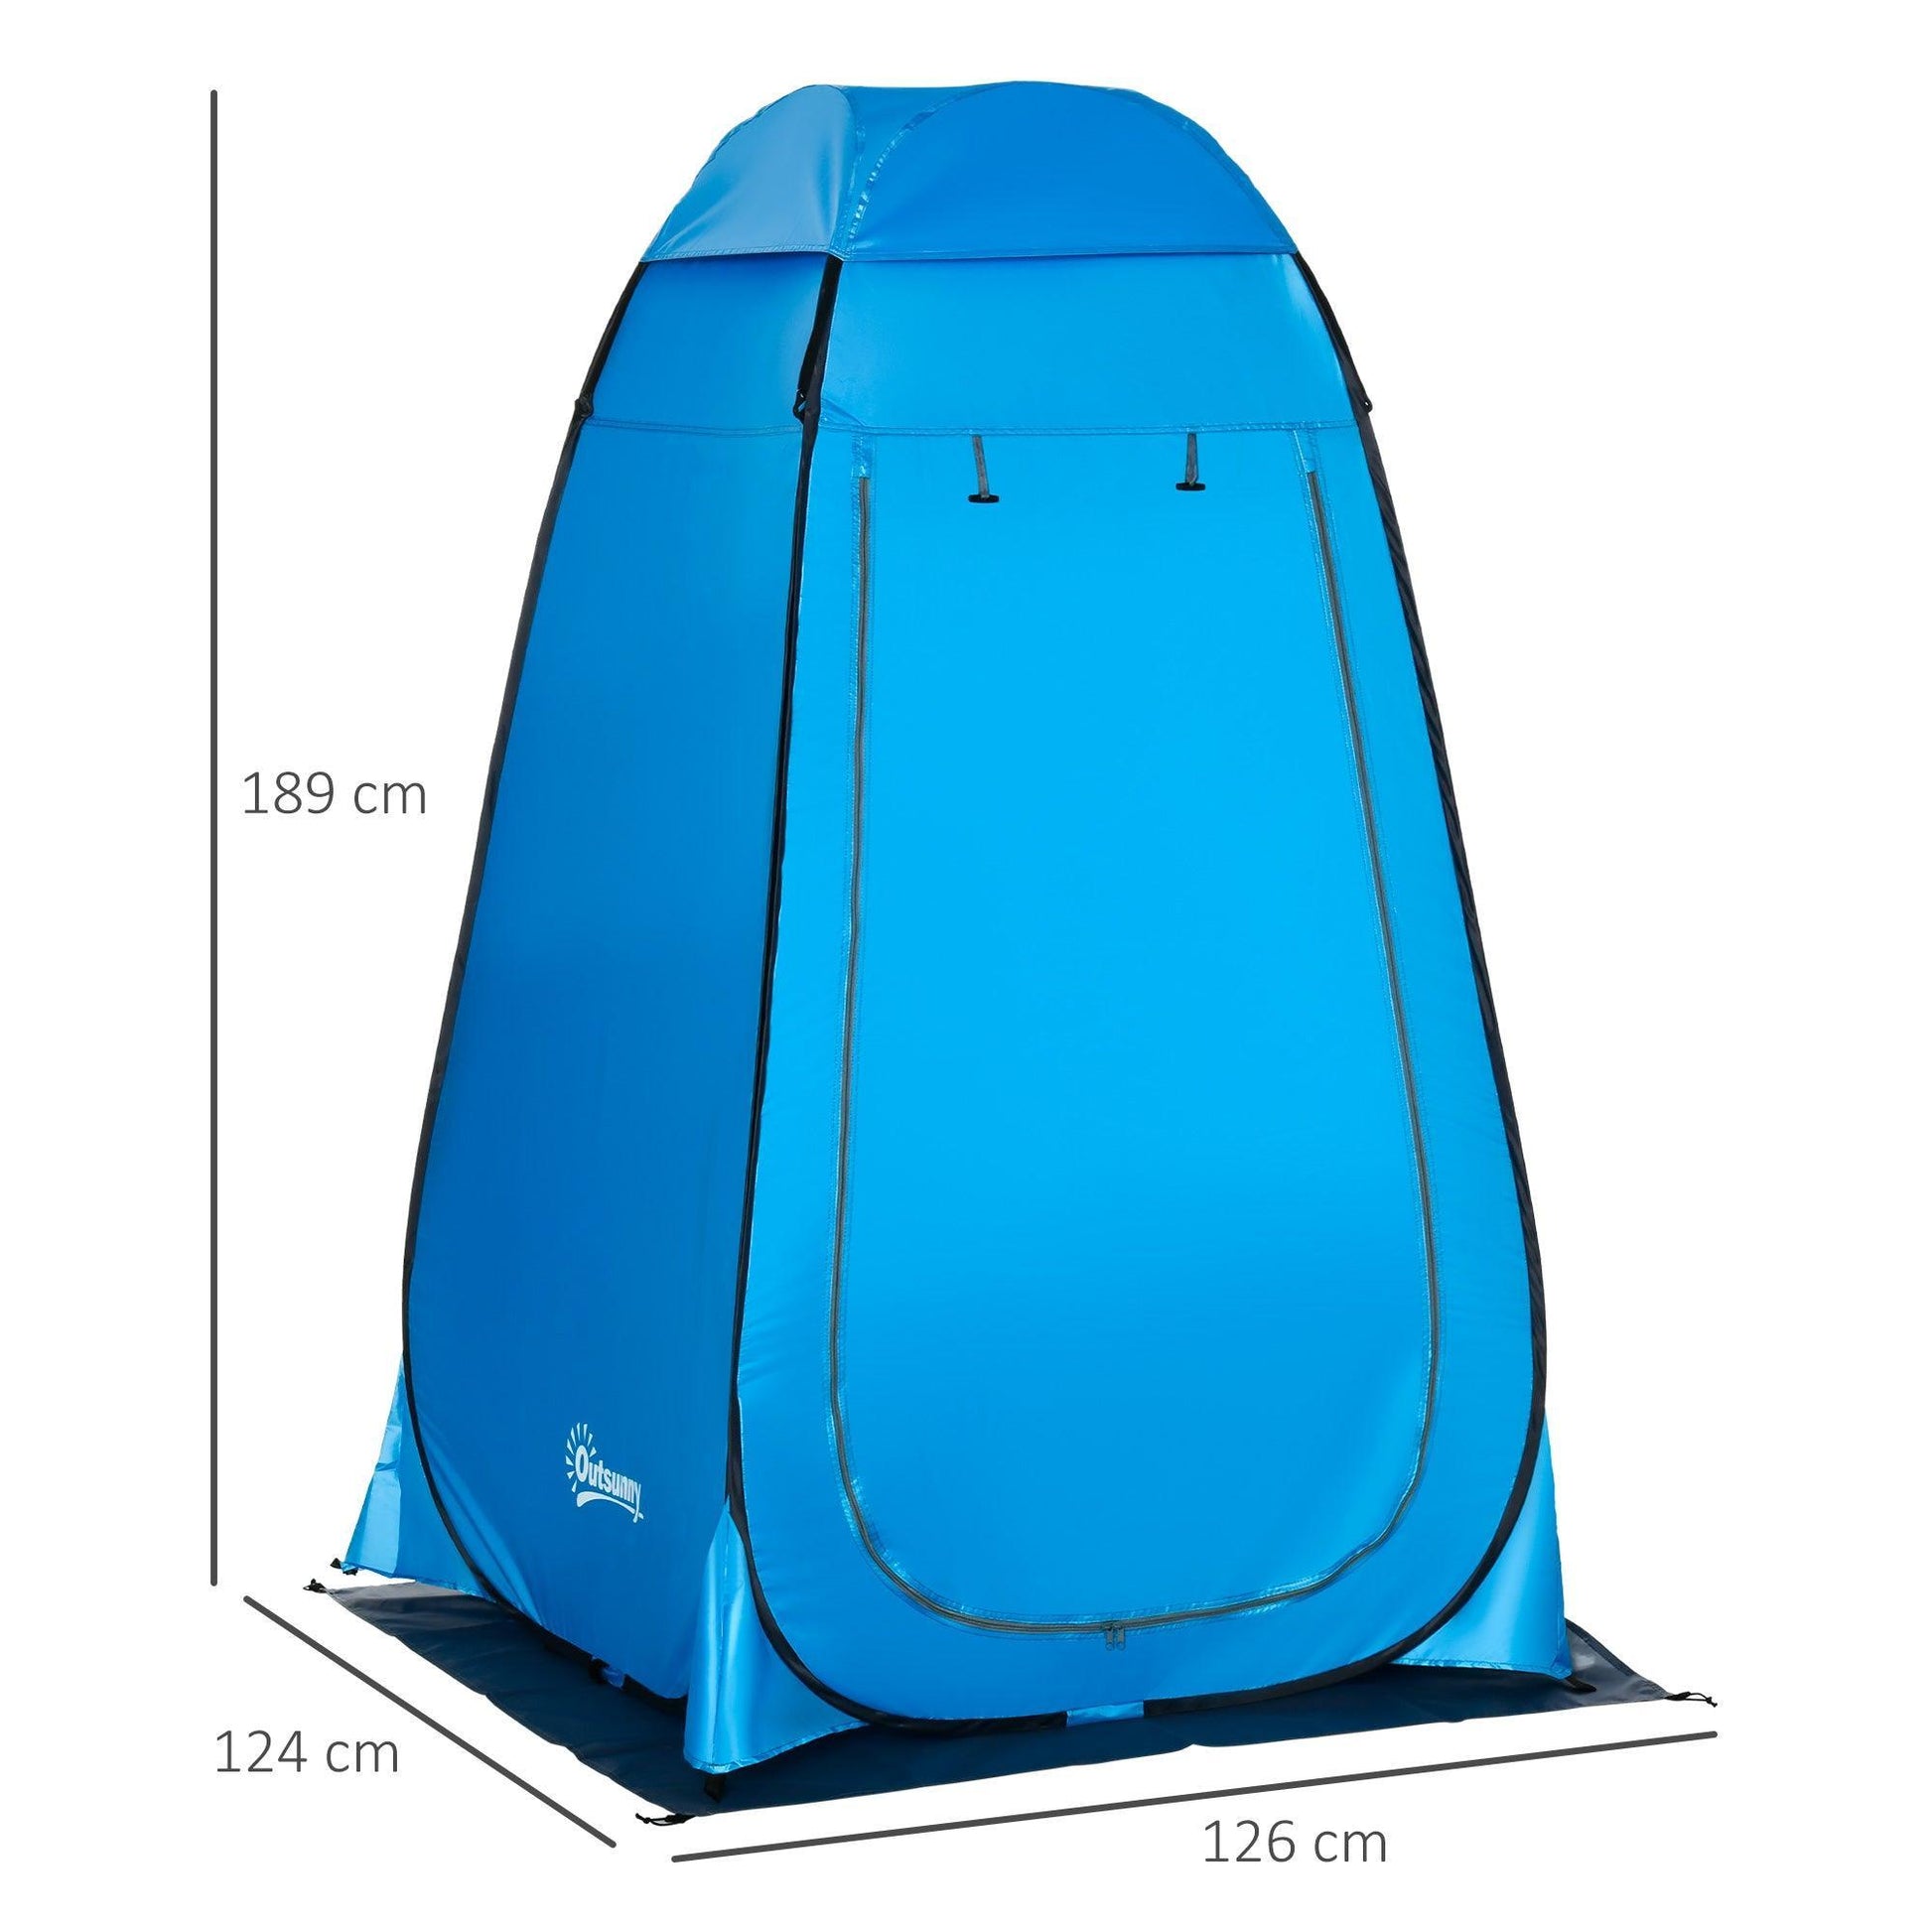 Outsunny Portable Camping Shower Tent for Outdoor Privacy - ALL4U RETAILER LTD